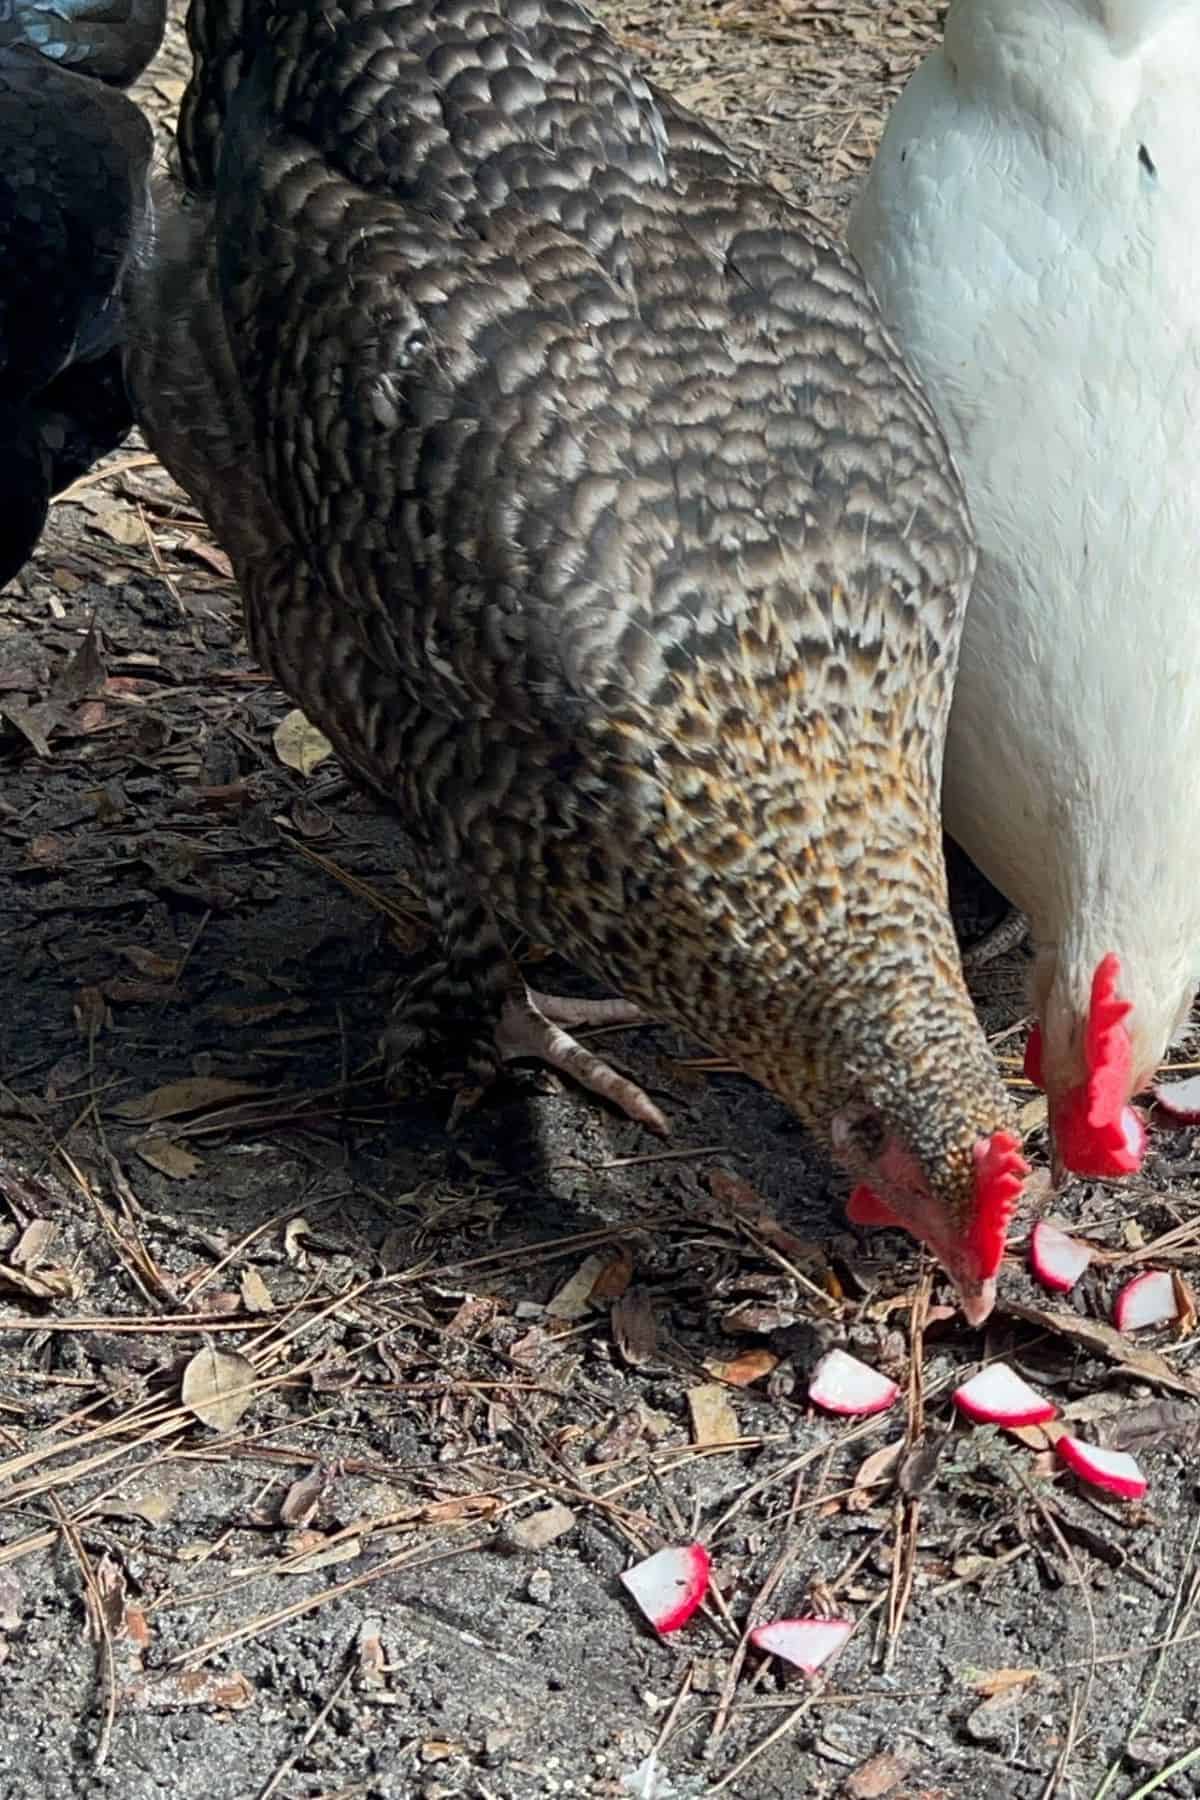 Chickens eating radishes off the ground.